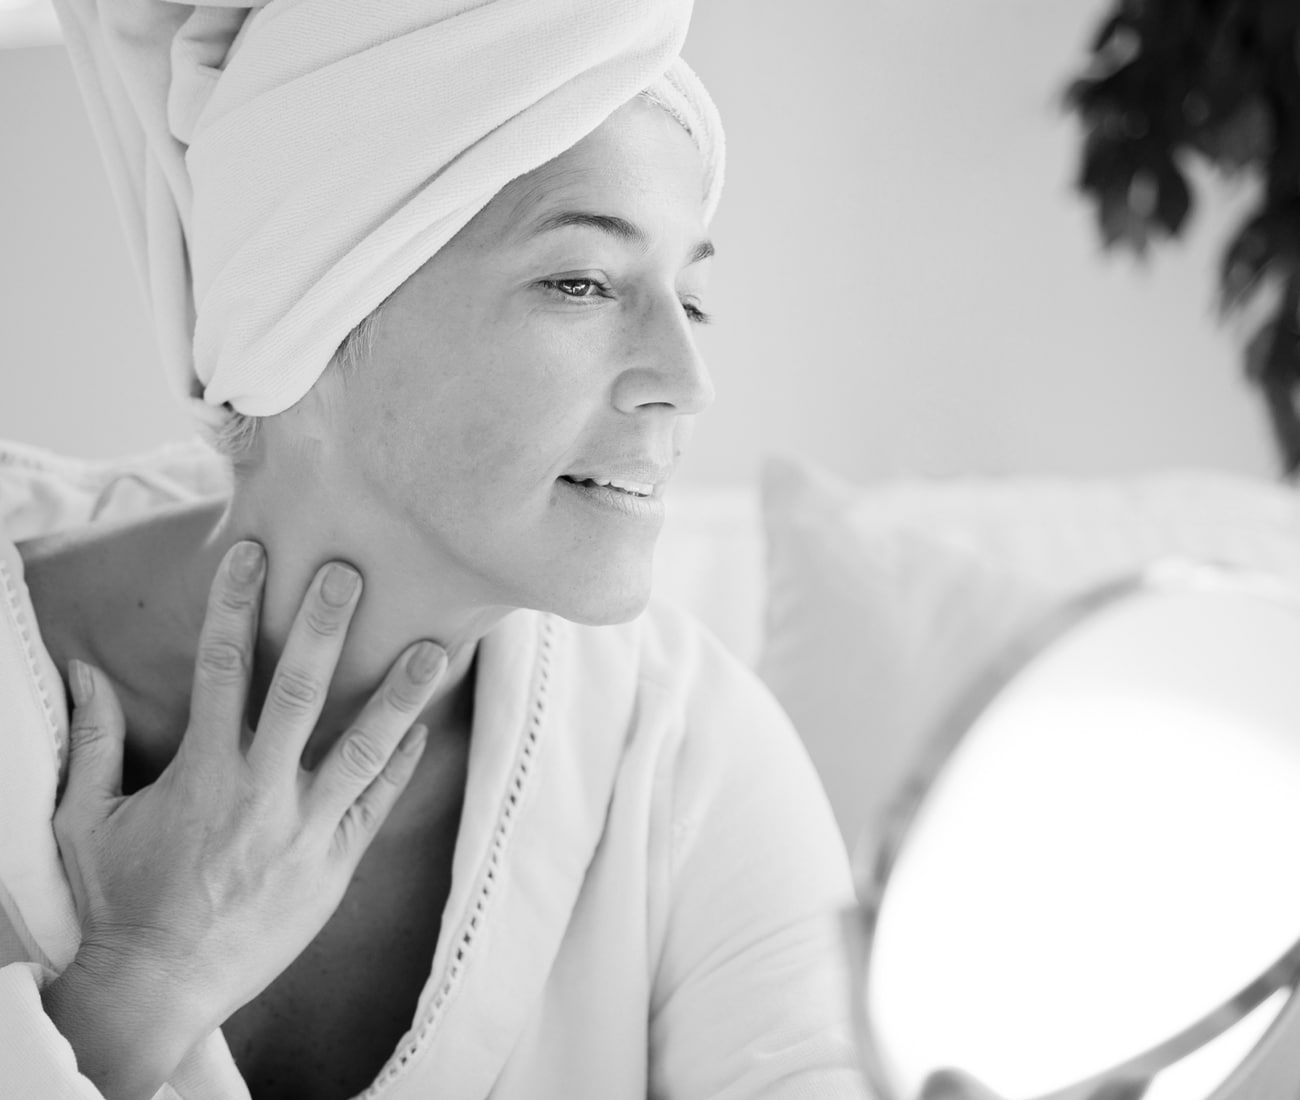 Woman With Towel On Head Looking At Neck On Skin In The Mirror, Black And White Mirror